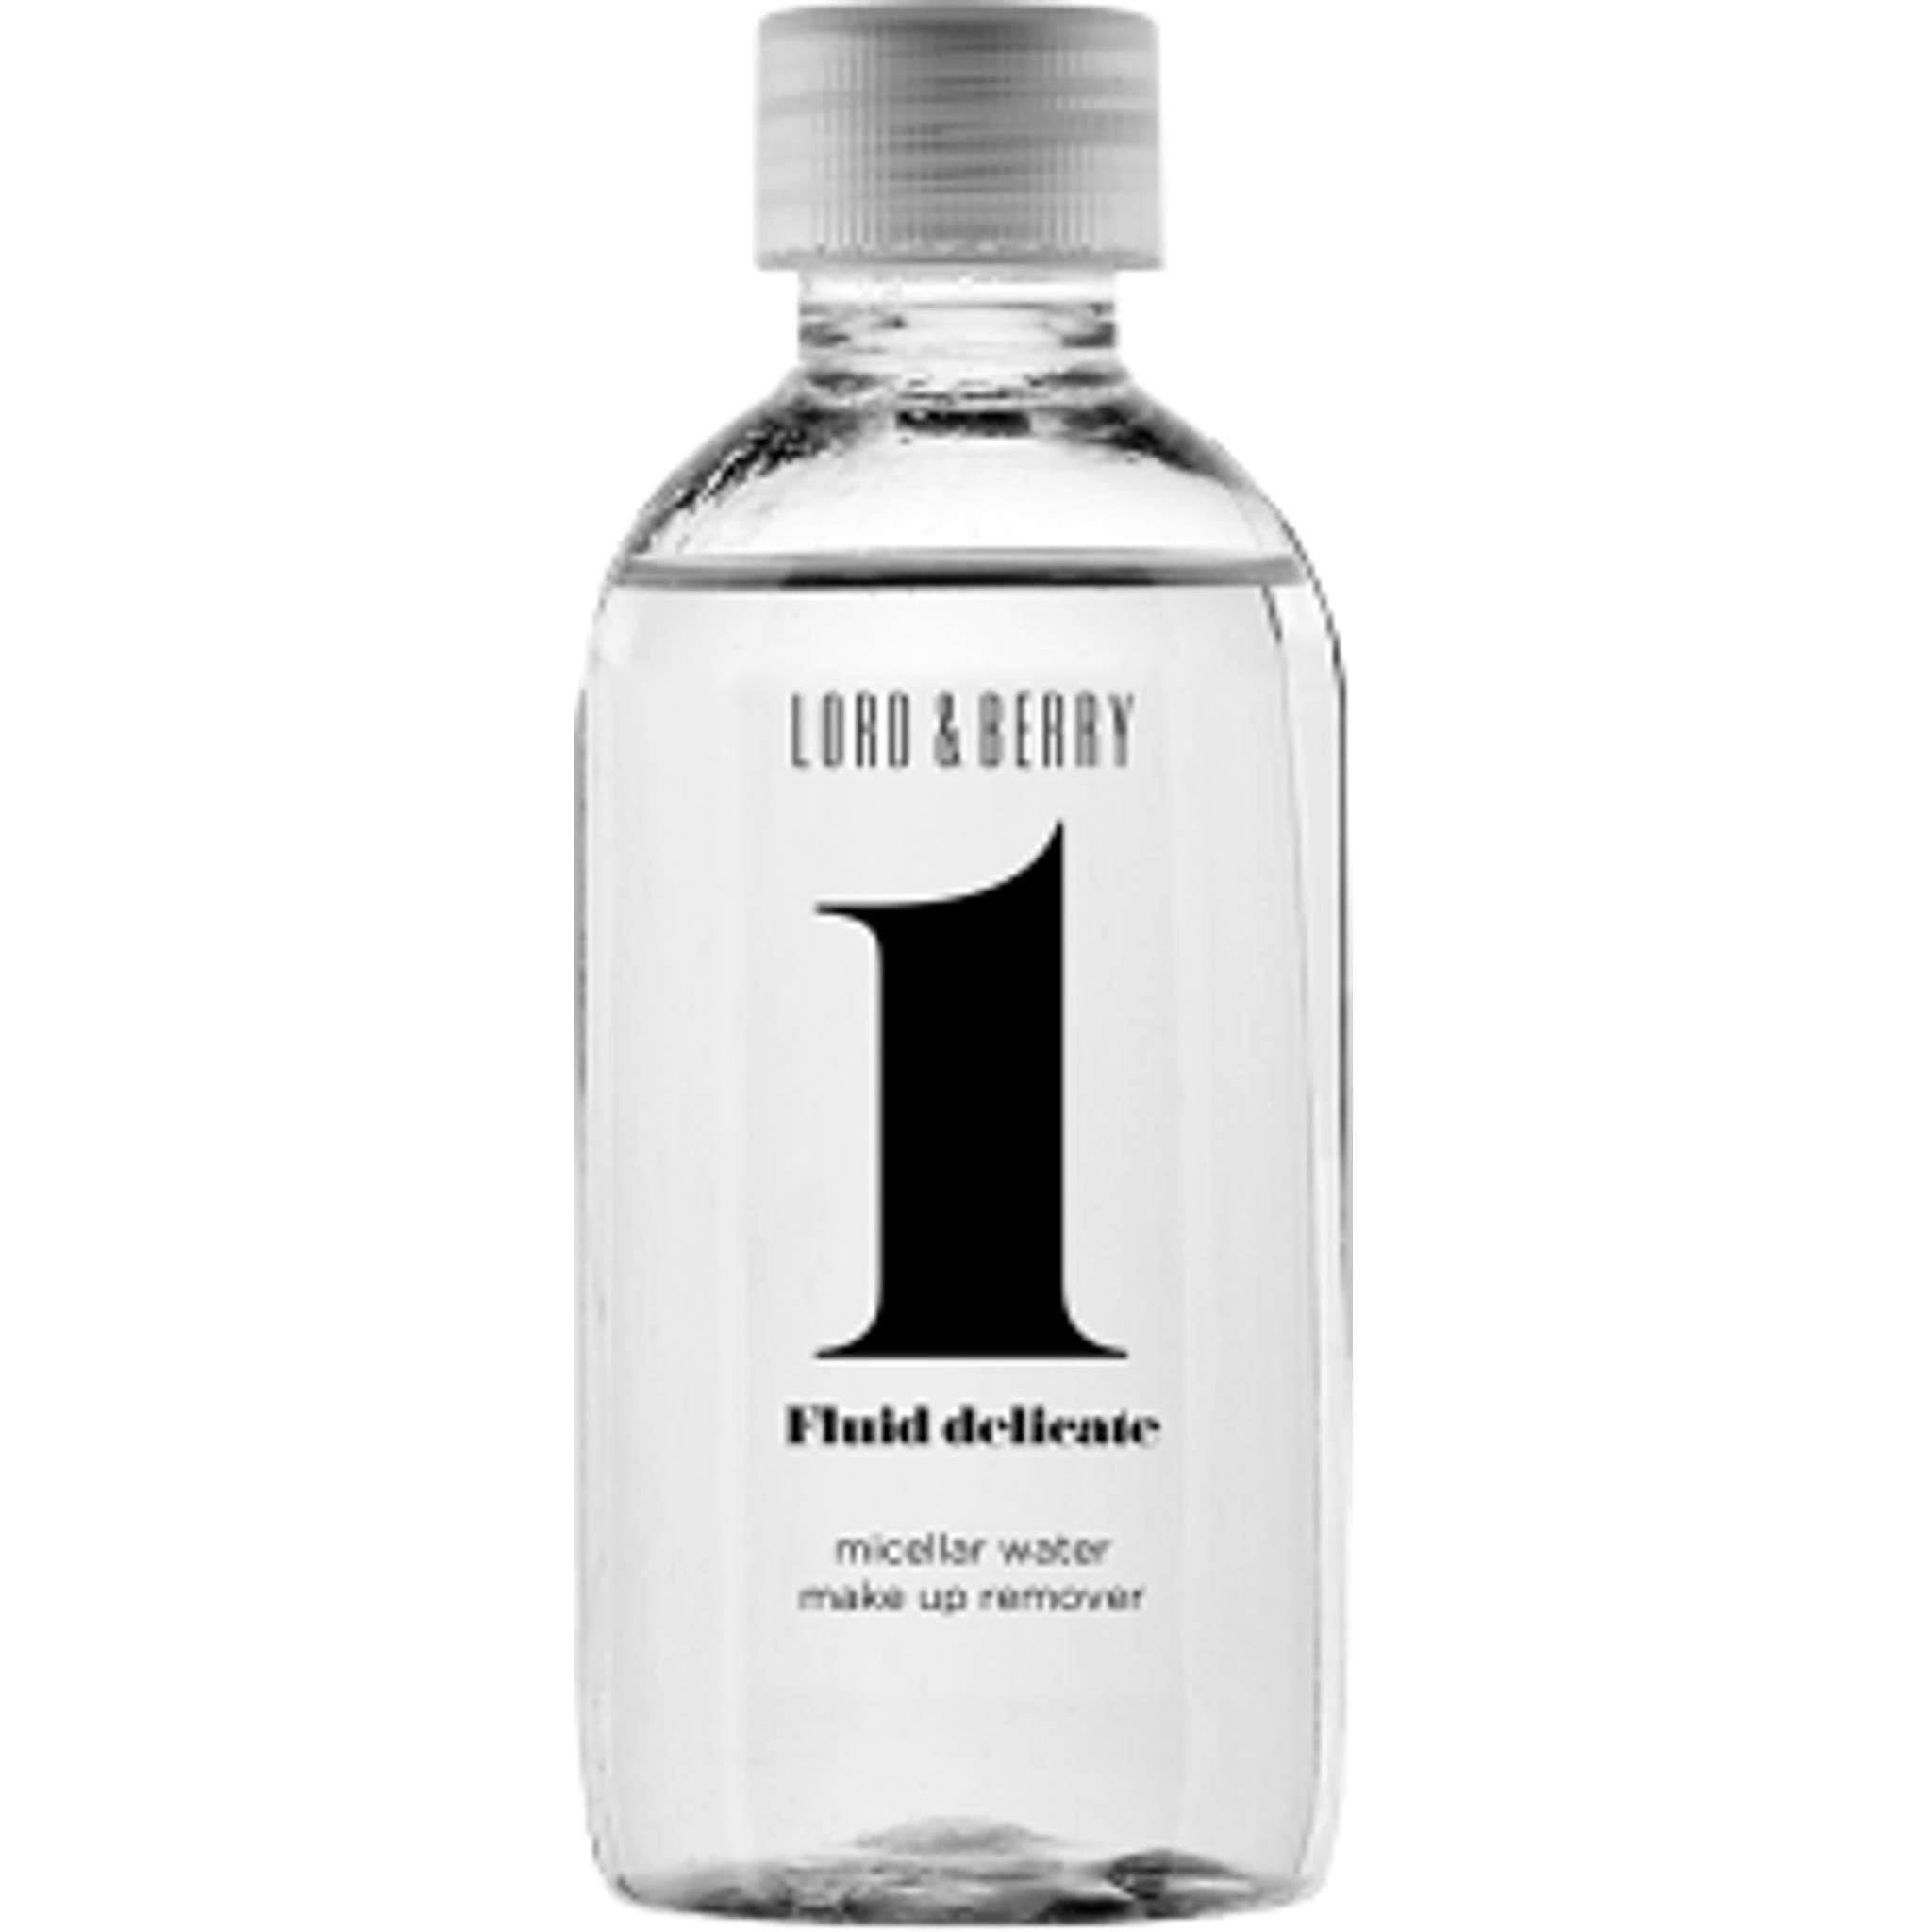 LORD & BERRY  Fluid Delicate - Trasparent #0814, cleanser, London Loves Beauty